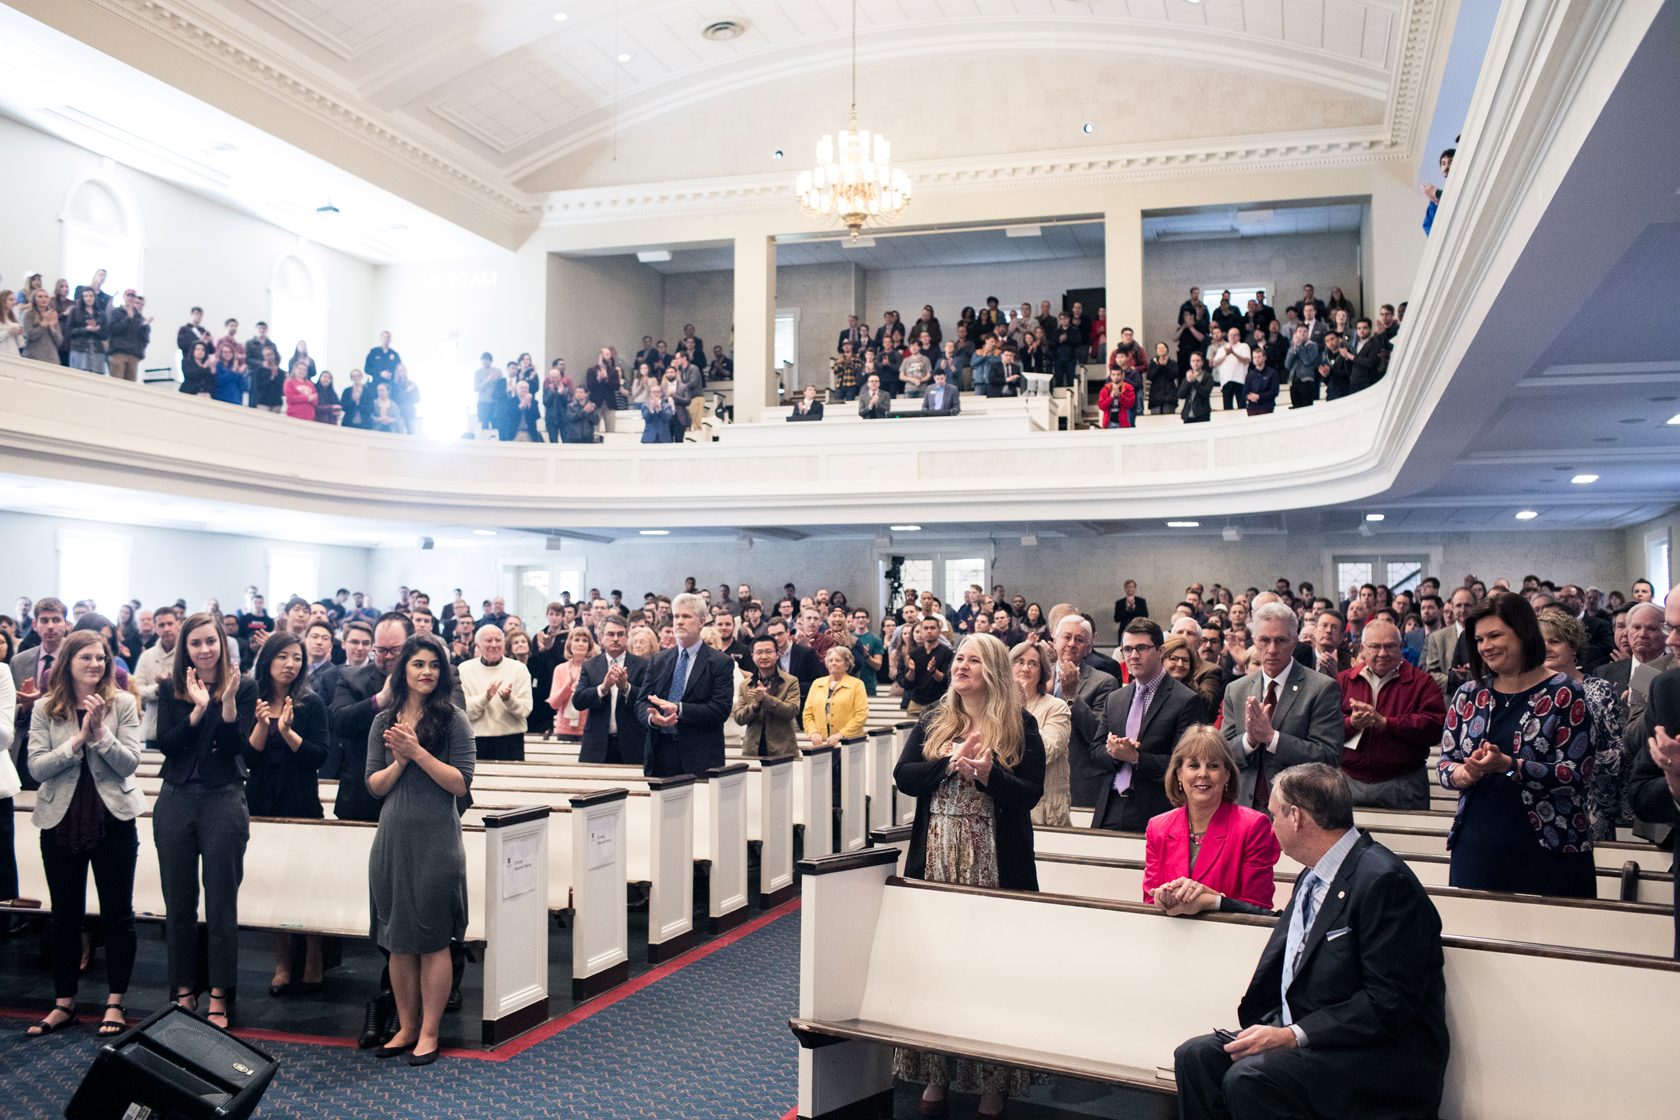 Mohler receives a standing ovation in recognition for his 25 years as president of the seminary.